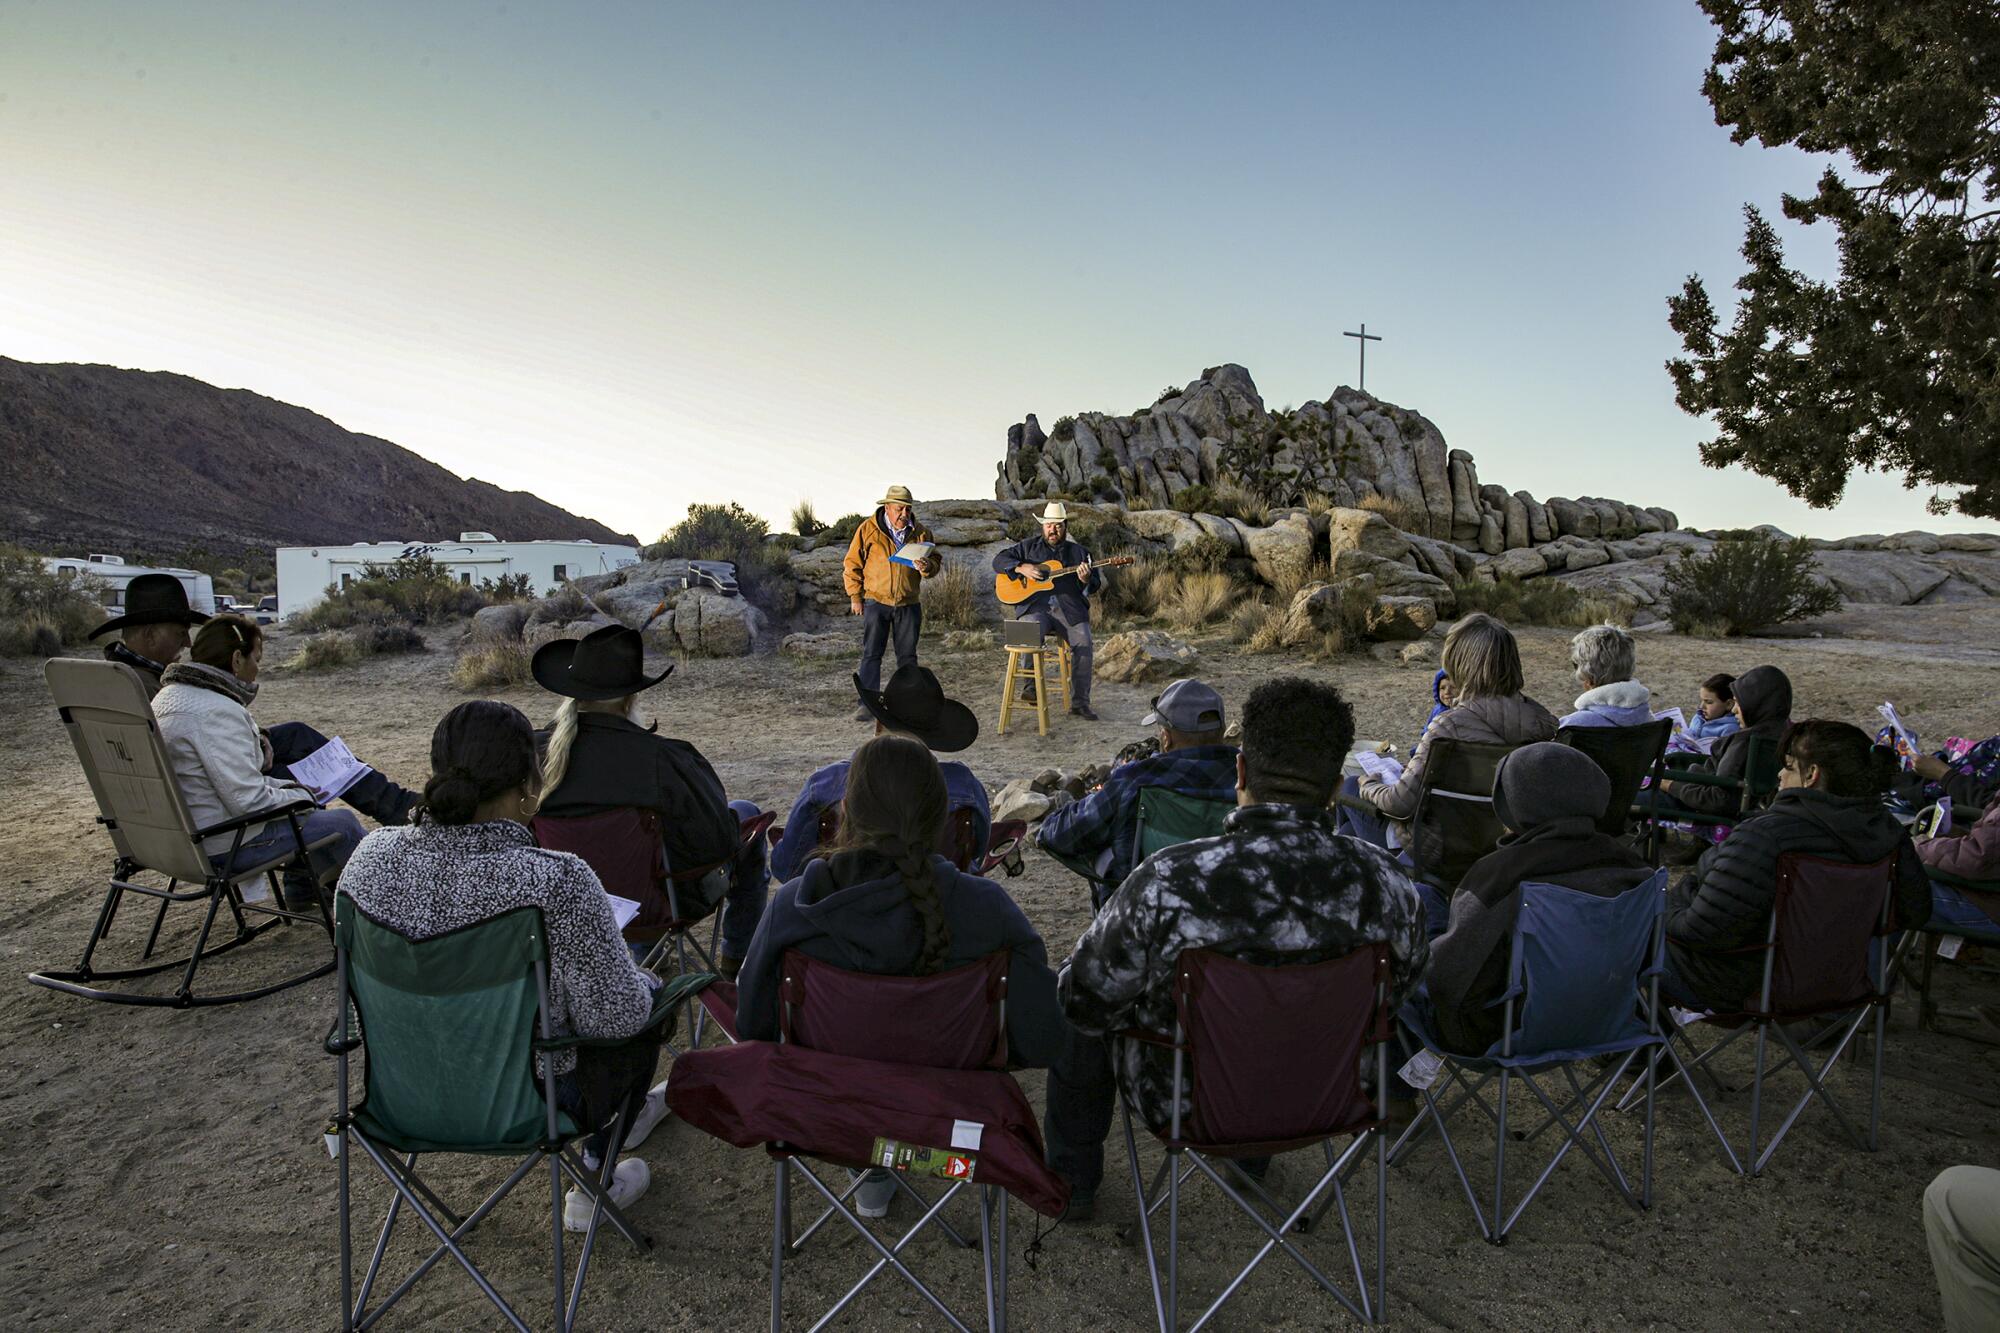 People sit in folding chairs, watching a preacher and a man with a guitar in front of a rock formation topped with a cross